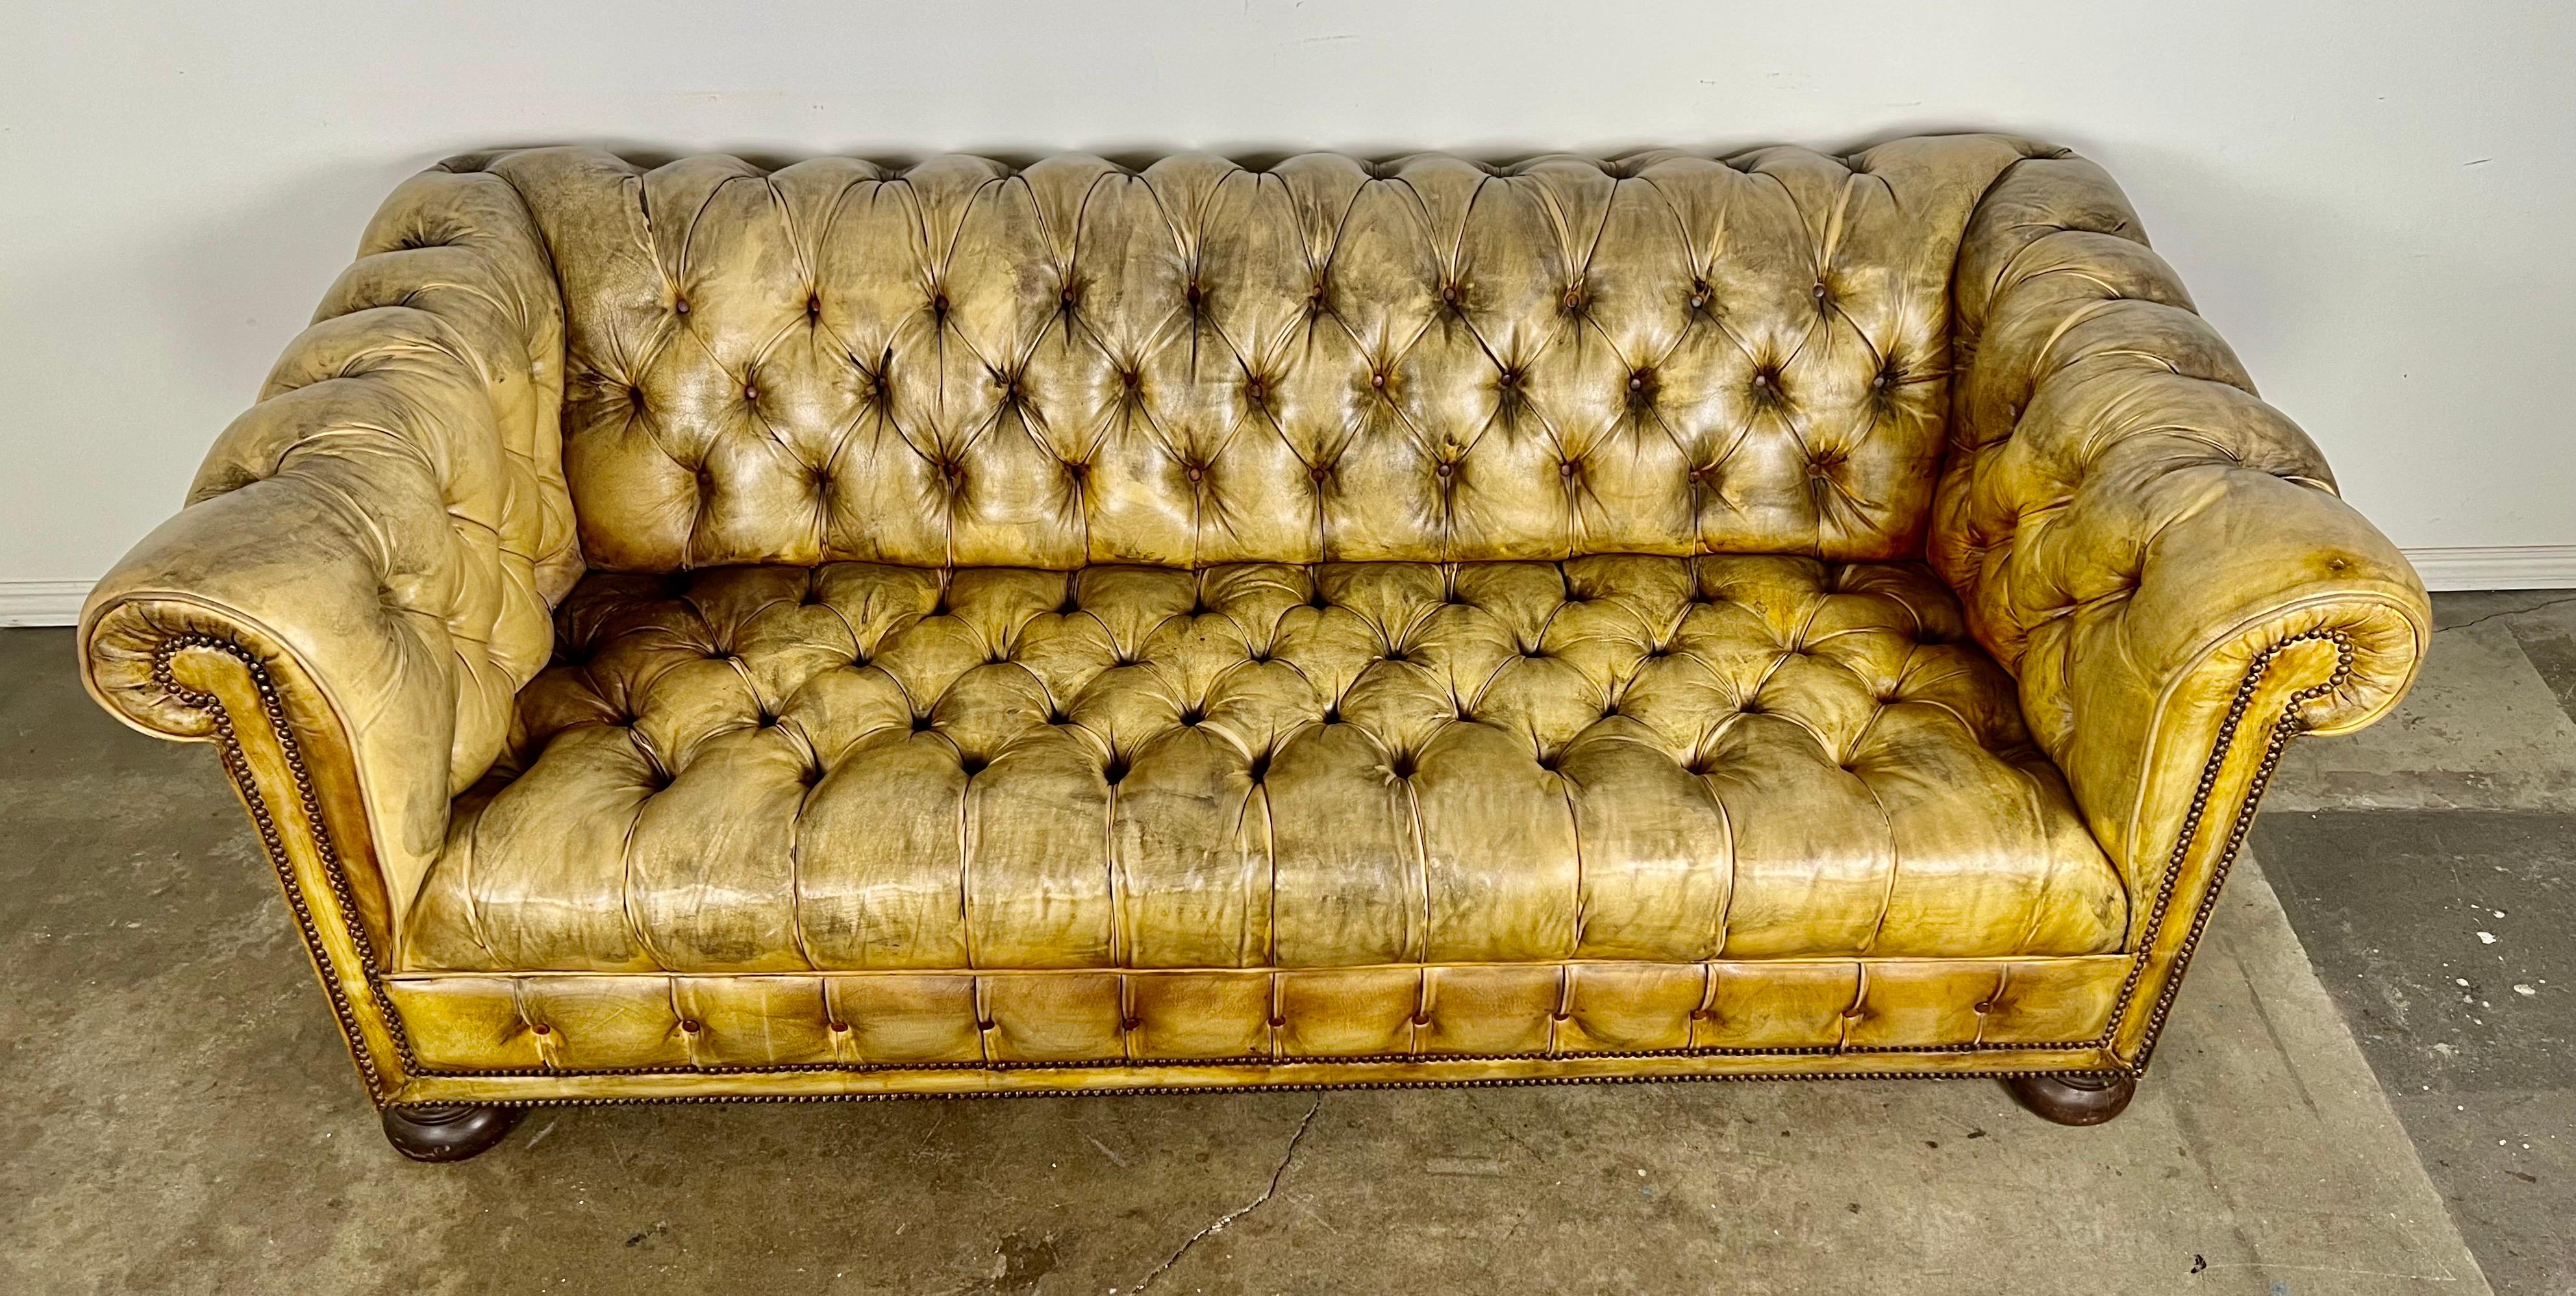 Vintage English Chesterfield style leather tufted sofa with bun feet.  The Chesterfield sofa has nailhead trim detail throughout.  This sofa has developed a beautiful patina from years of use.